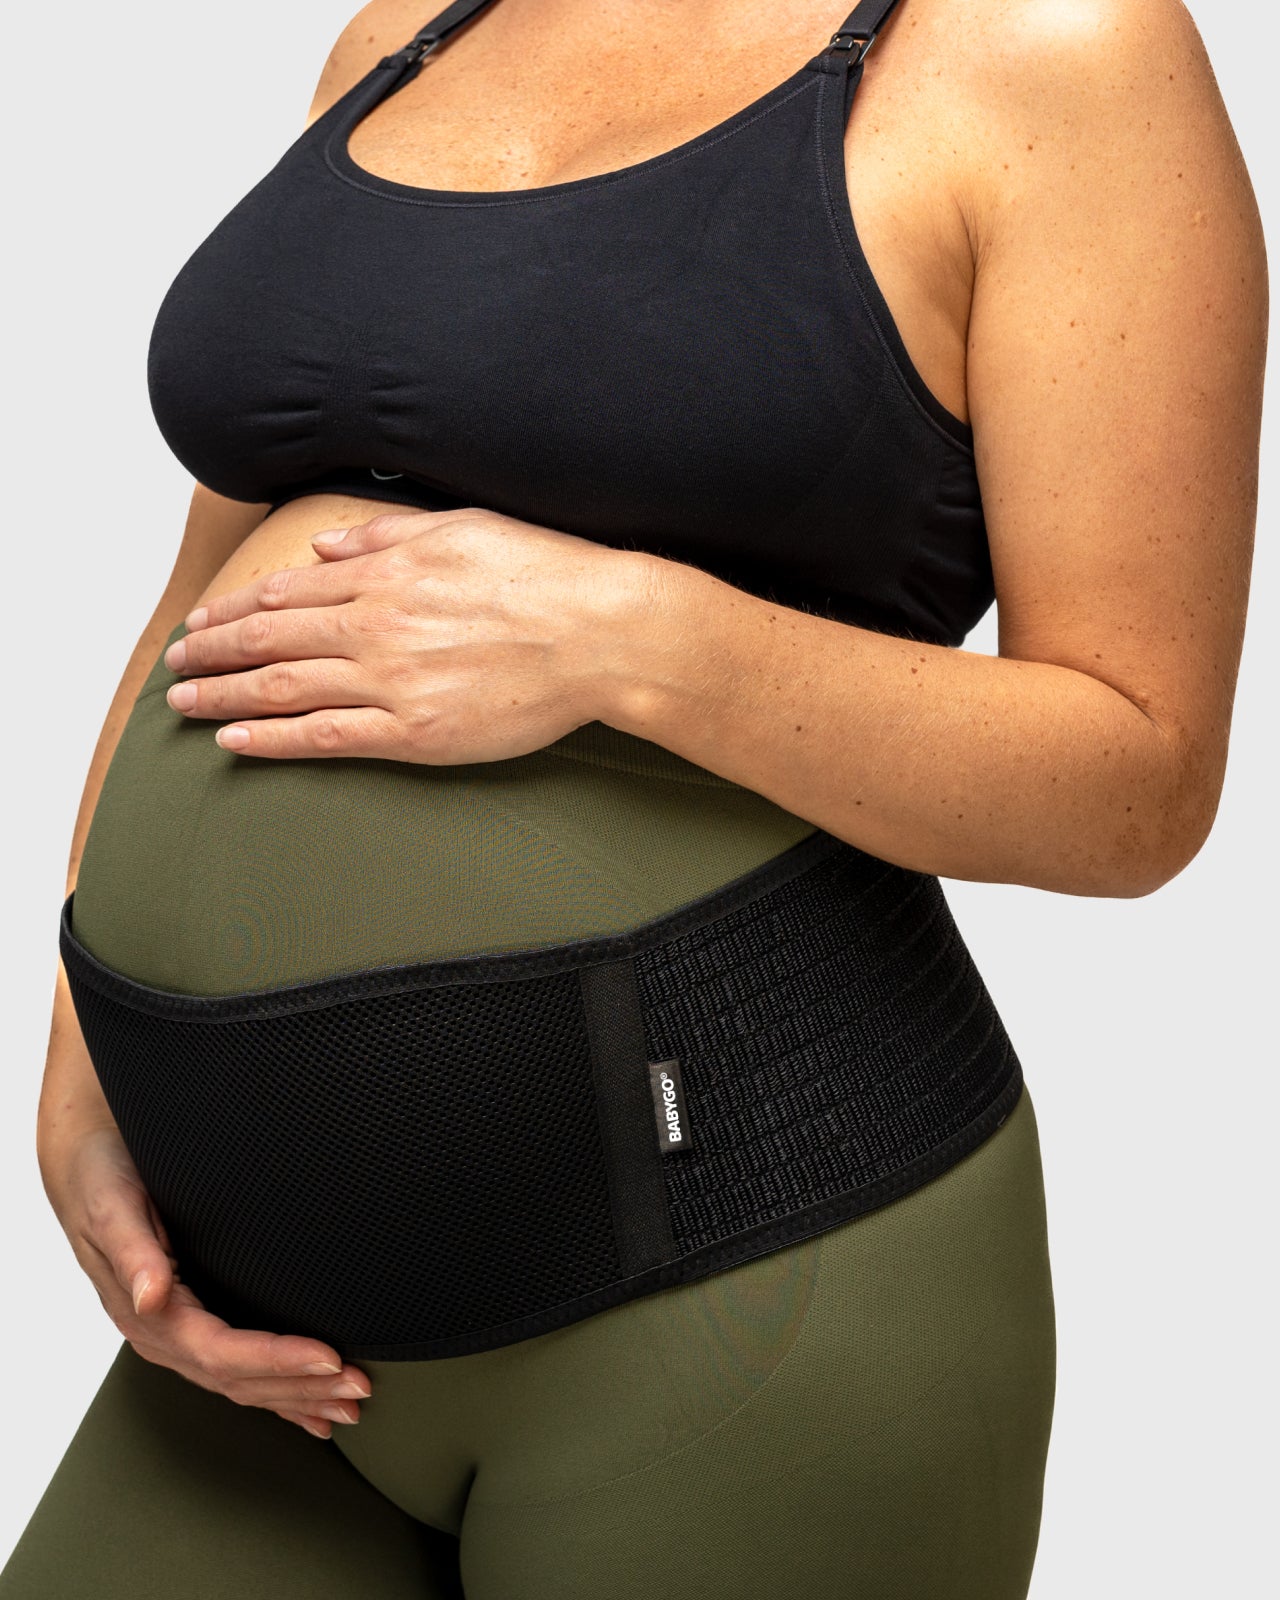 Pregnancy Maternity Belly Support Band - Black / L